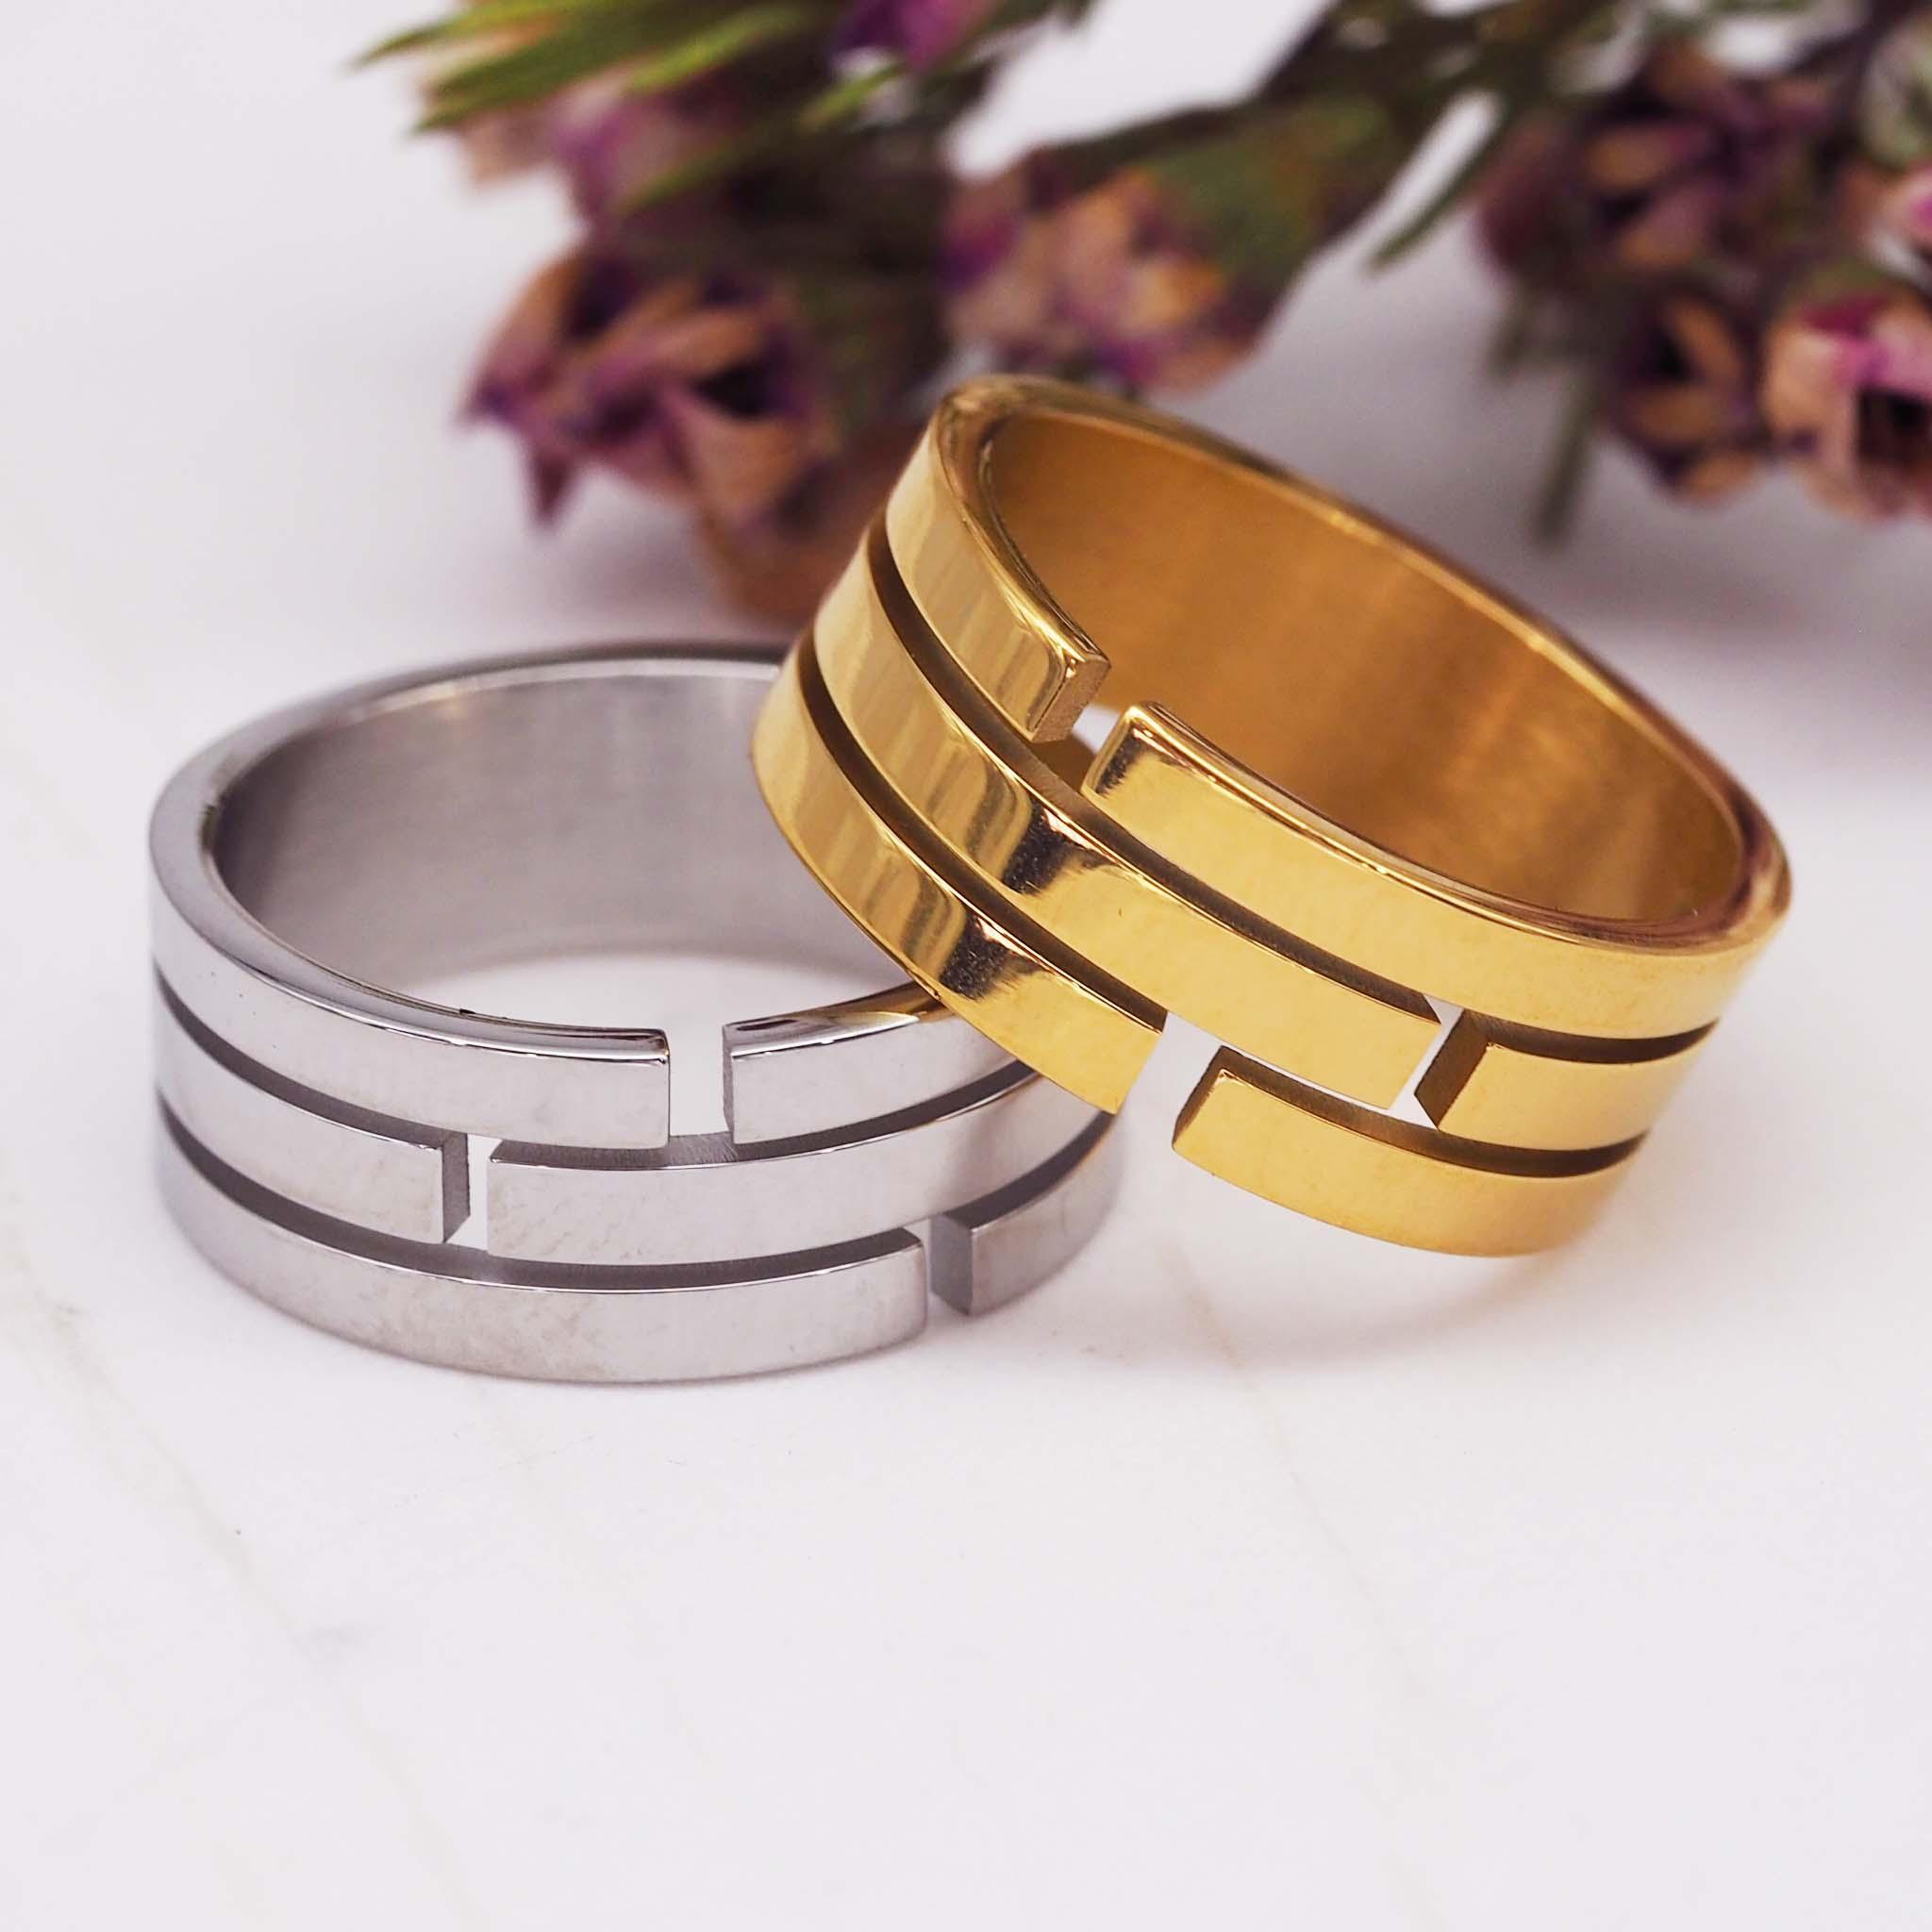 Zephyr Band Ring - womens jewellery by indie and harper